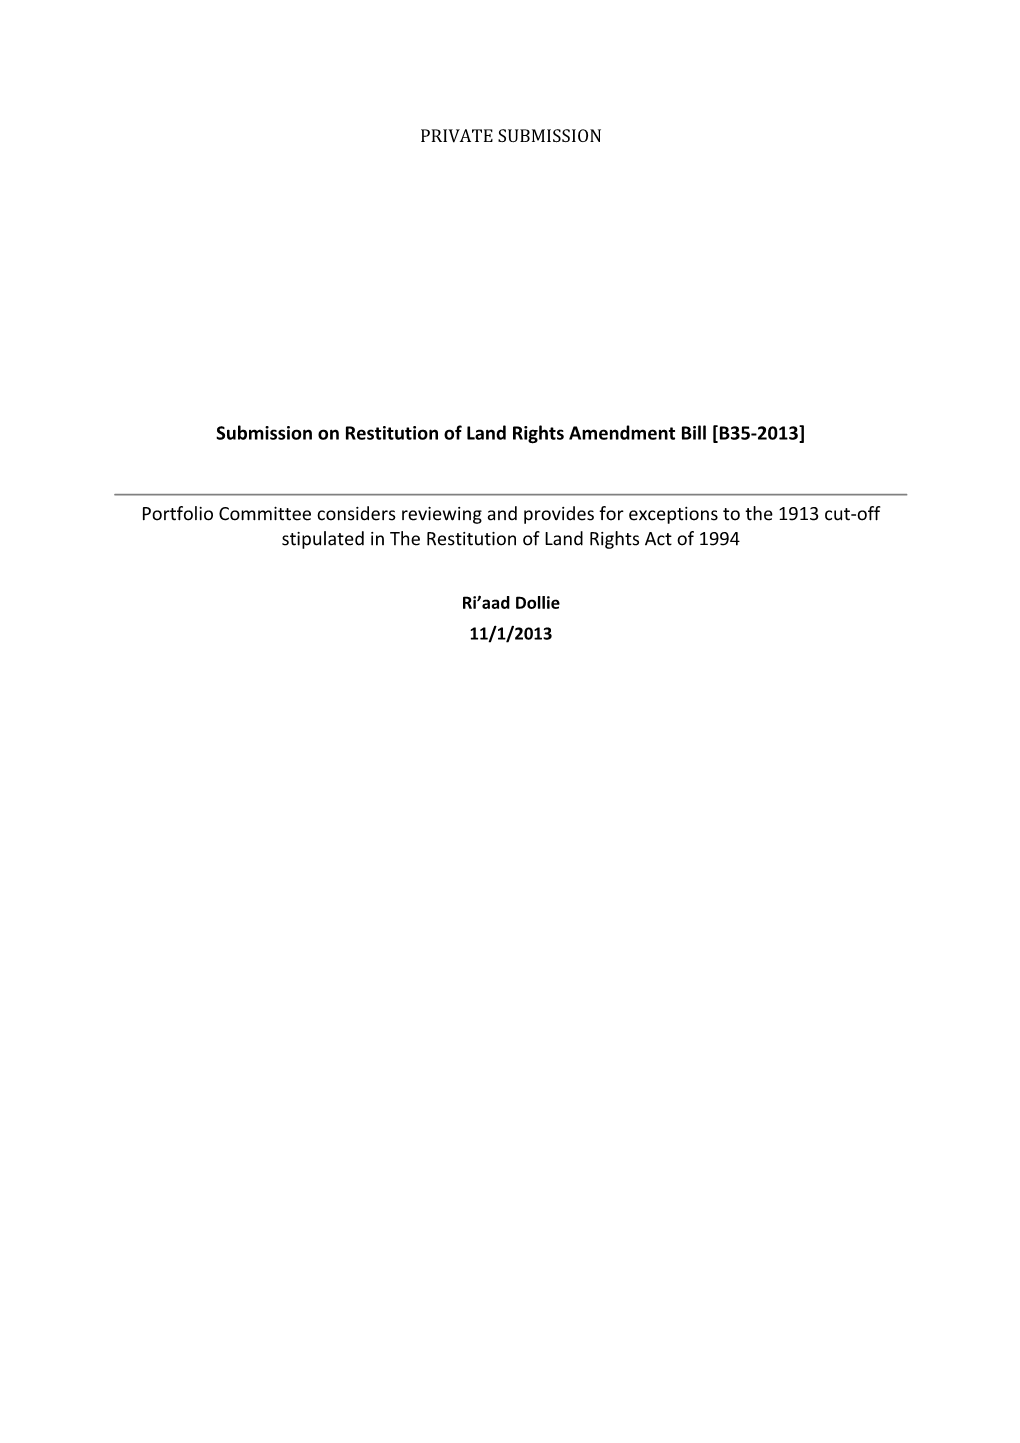 Submission on Restitution of Land Rights Amendment Bill B35-2013